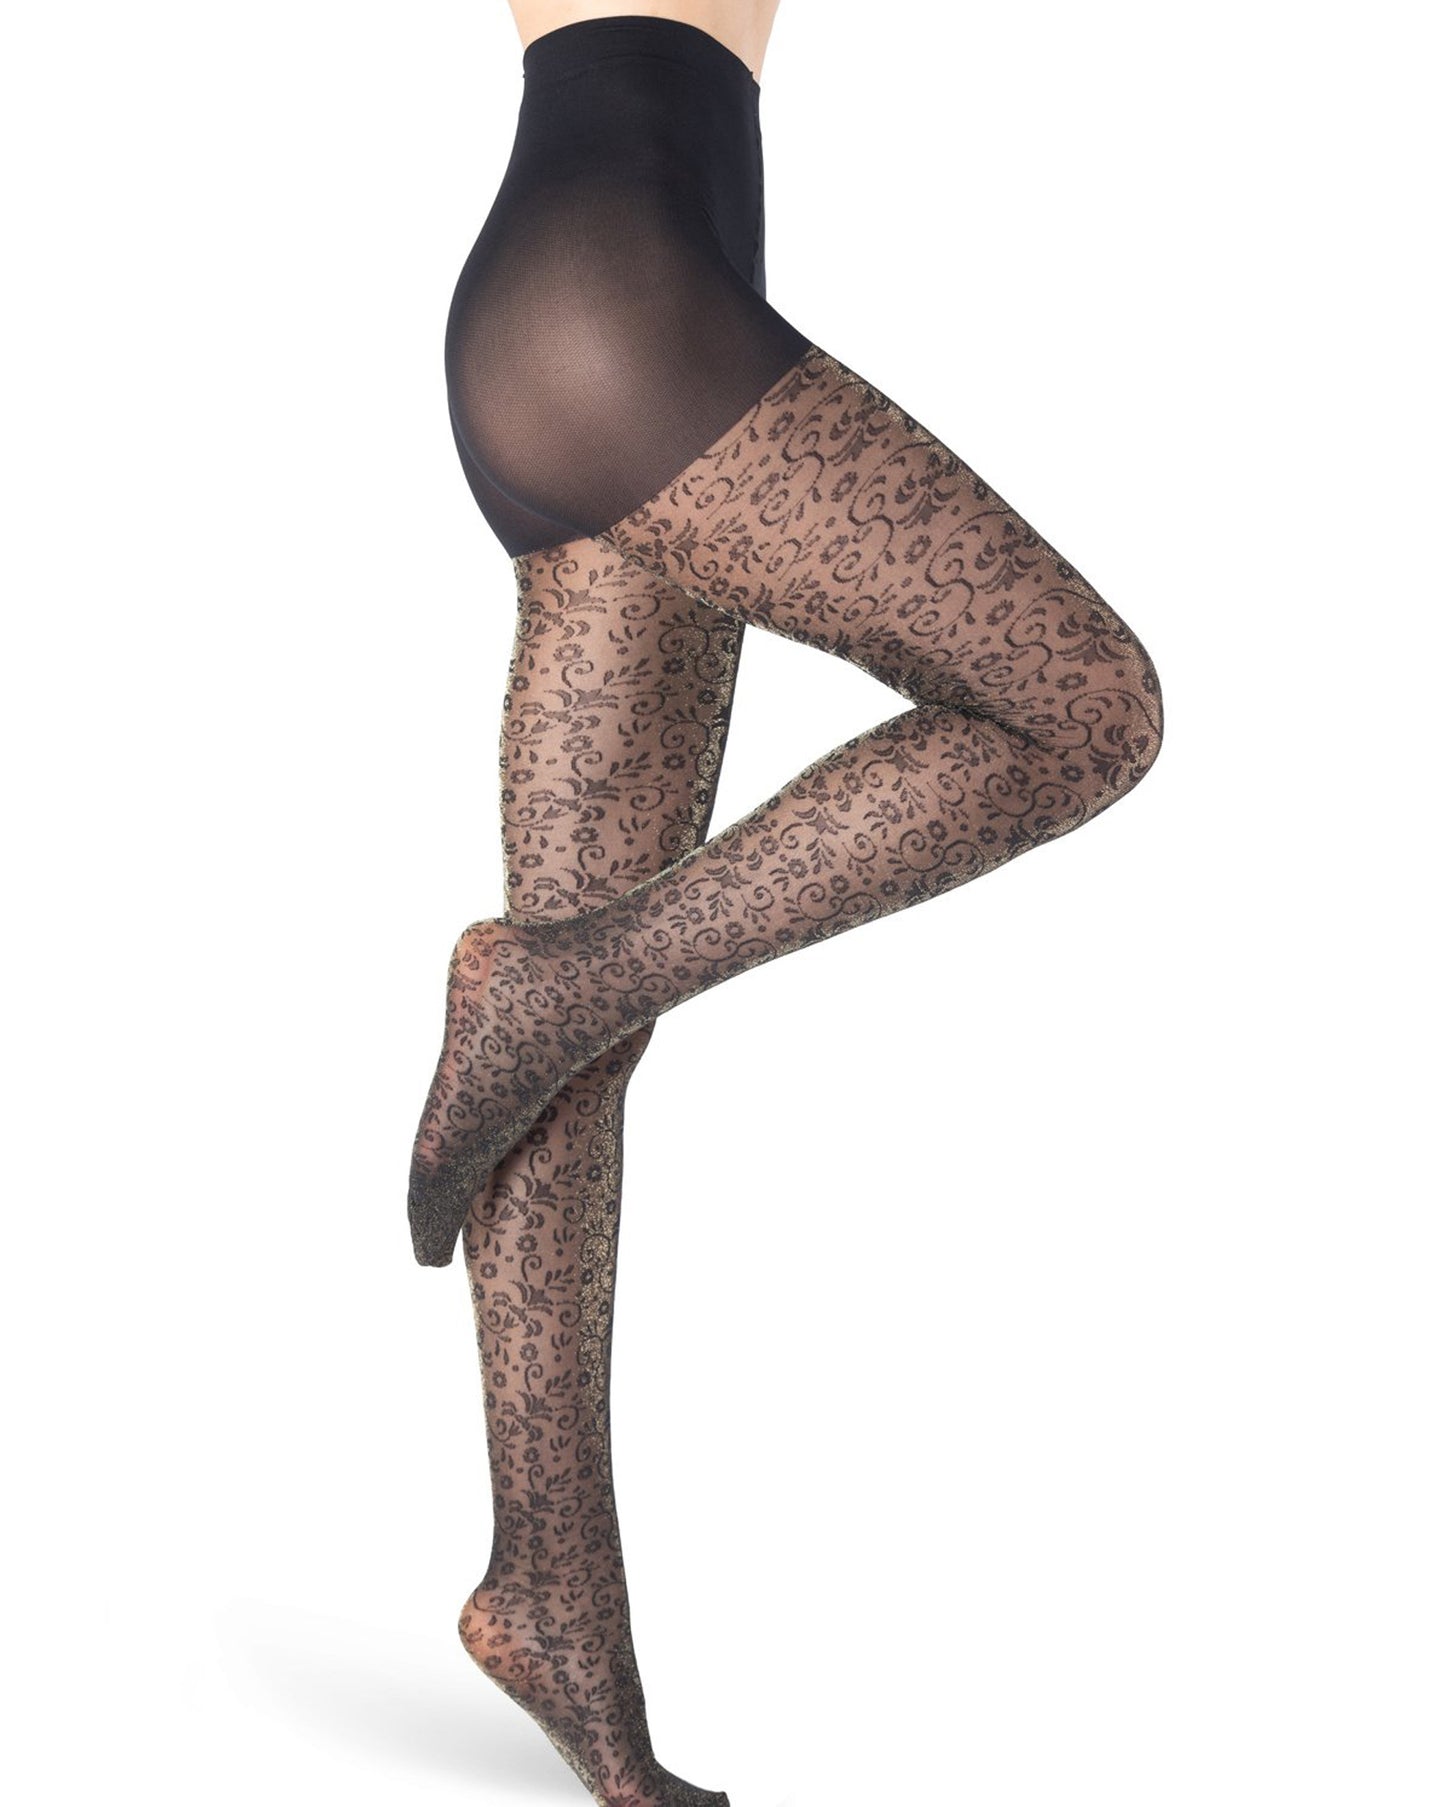 Sheer black fashion tights with an all over floral pattern with sparkly gold lamé, plain boxer brief, flat seams and gusset.